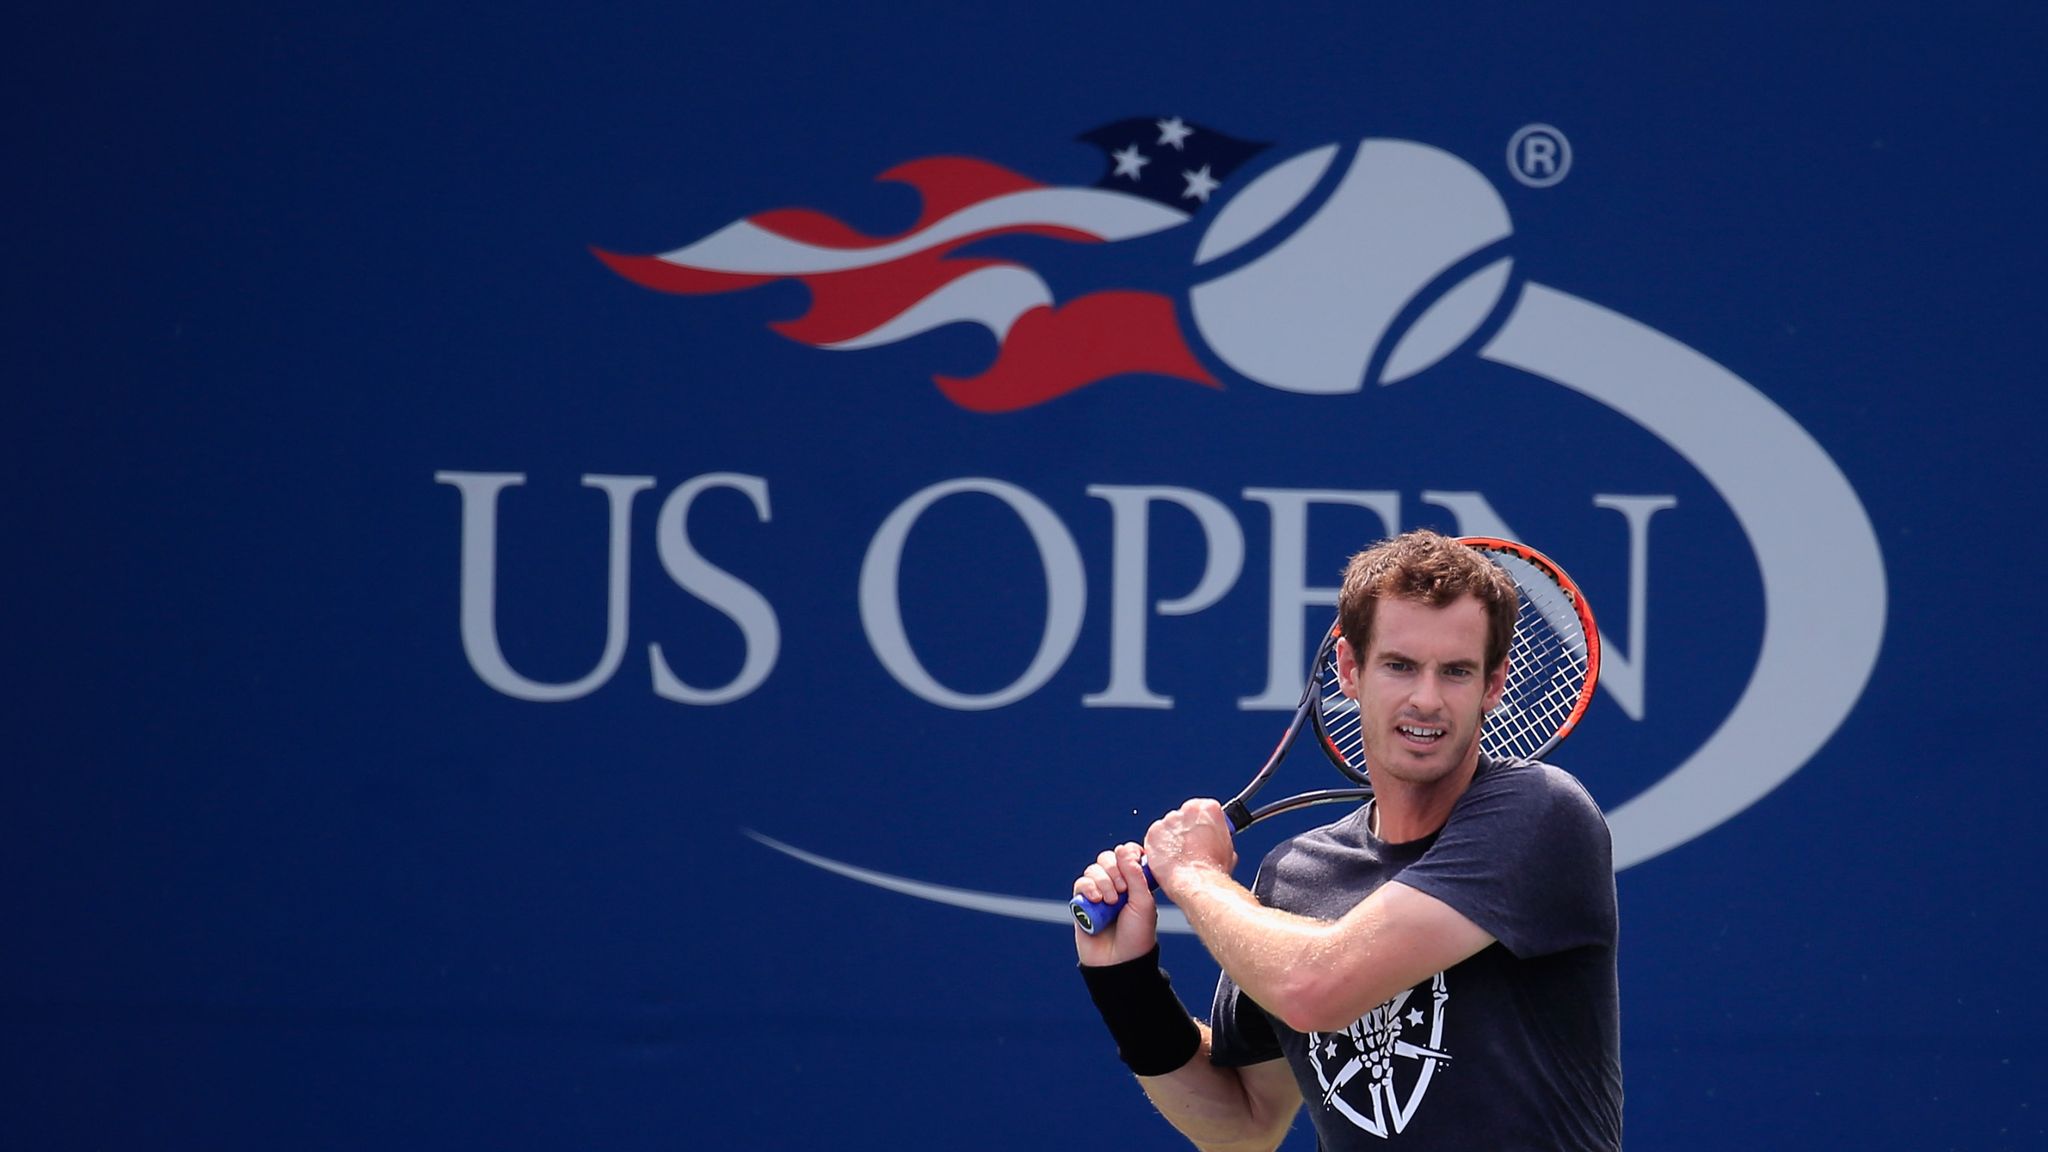 Thursday's order of play at the US Open Tennis News Sky Sports